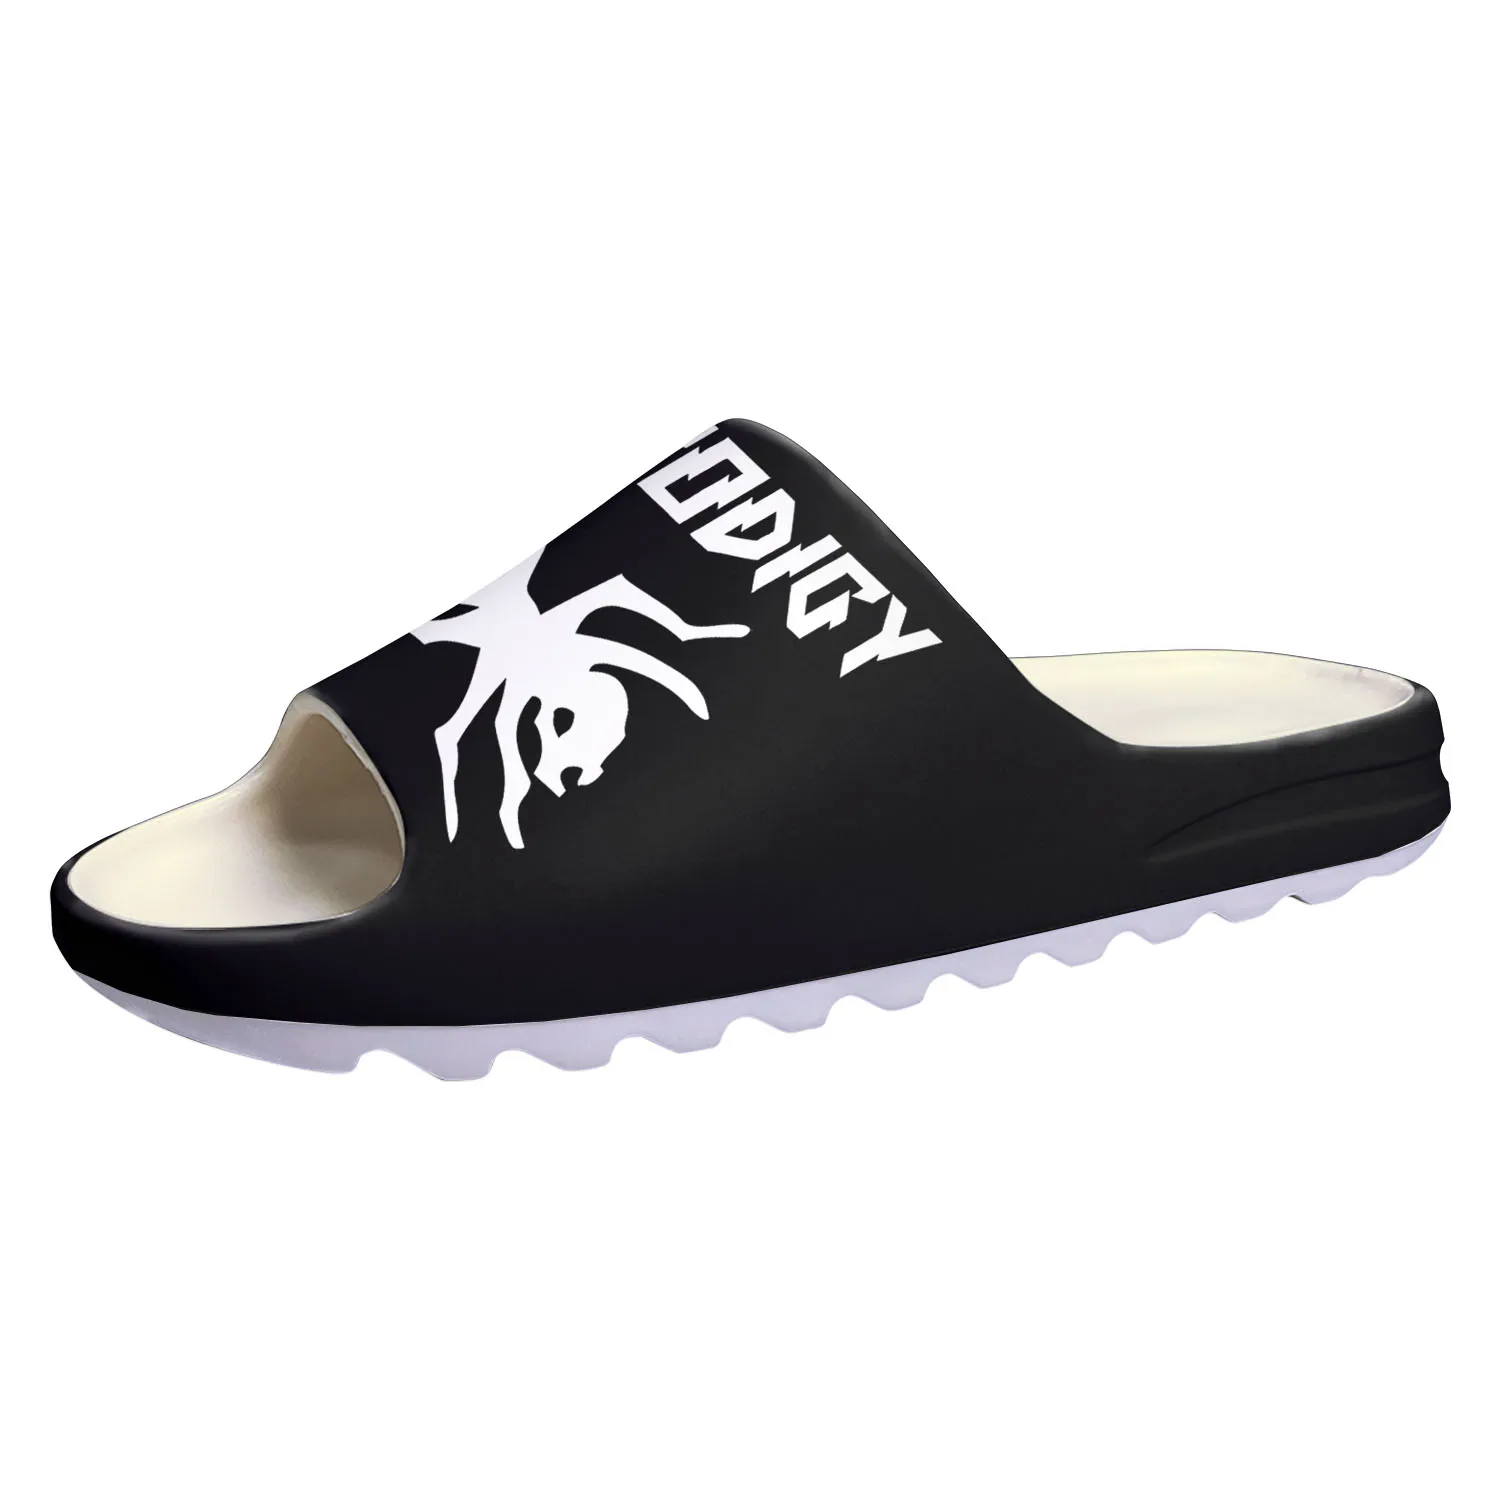 

The Prodigy Rock Band Soft Sole Sllipers Home Clogs Step on Water Shoes Mens Womens Teenager Bathroom Customize on Shit Sandals